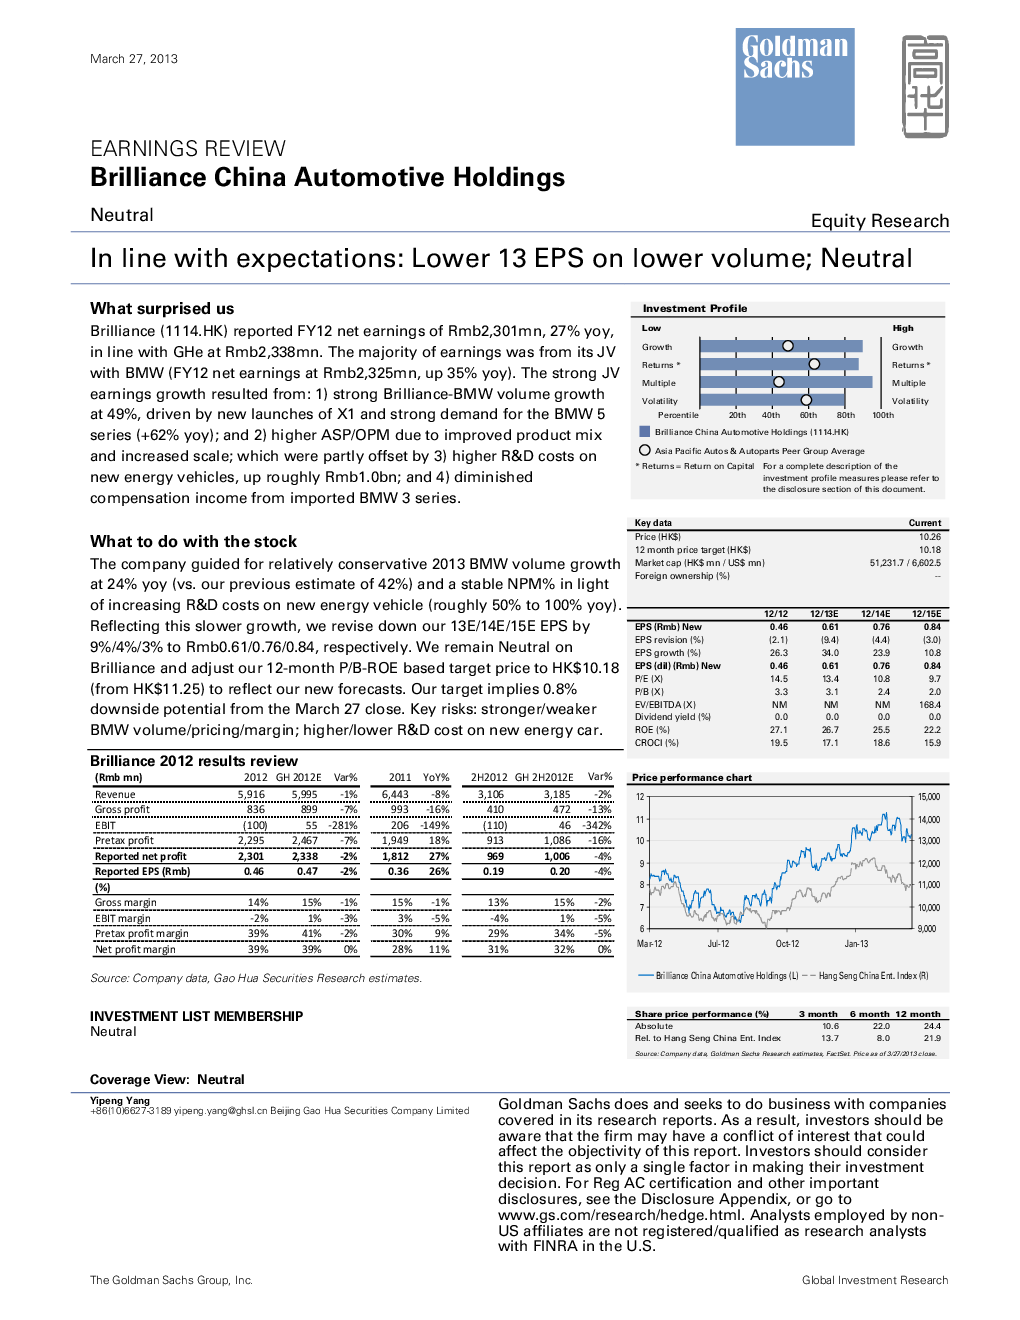 Brilliance China Automotive Holdings In Line With Expectations Lower 13 Eps On Lower Volume Neutral 发现报告